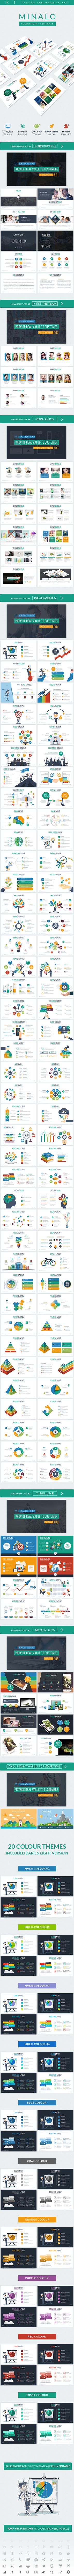 Discover Minalo Business Powerpoint Template Infographicnow Com Your Number One Source For Daily Infographics Visual Creativity